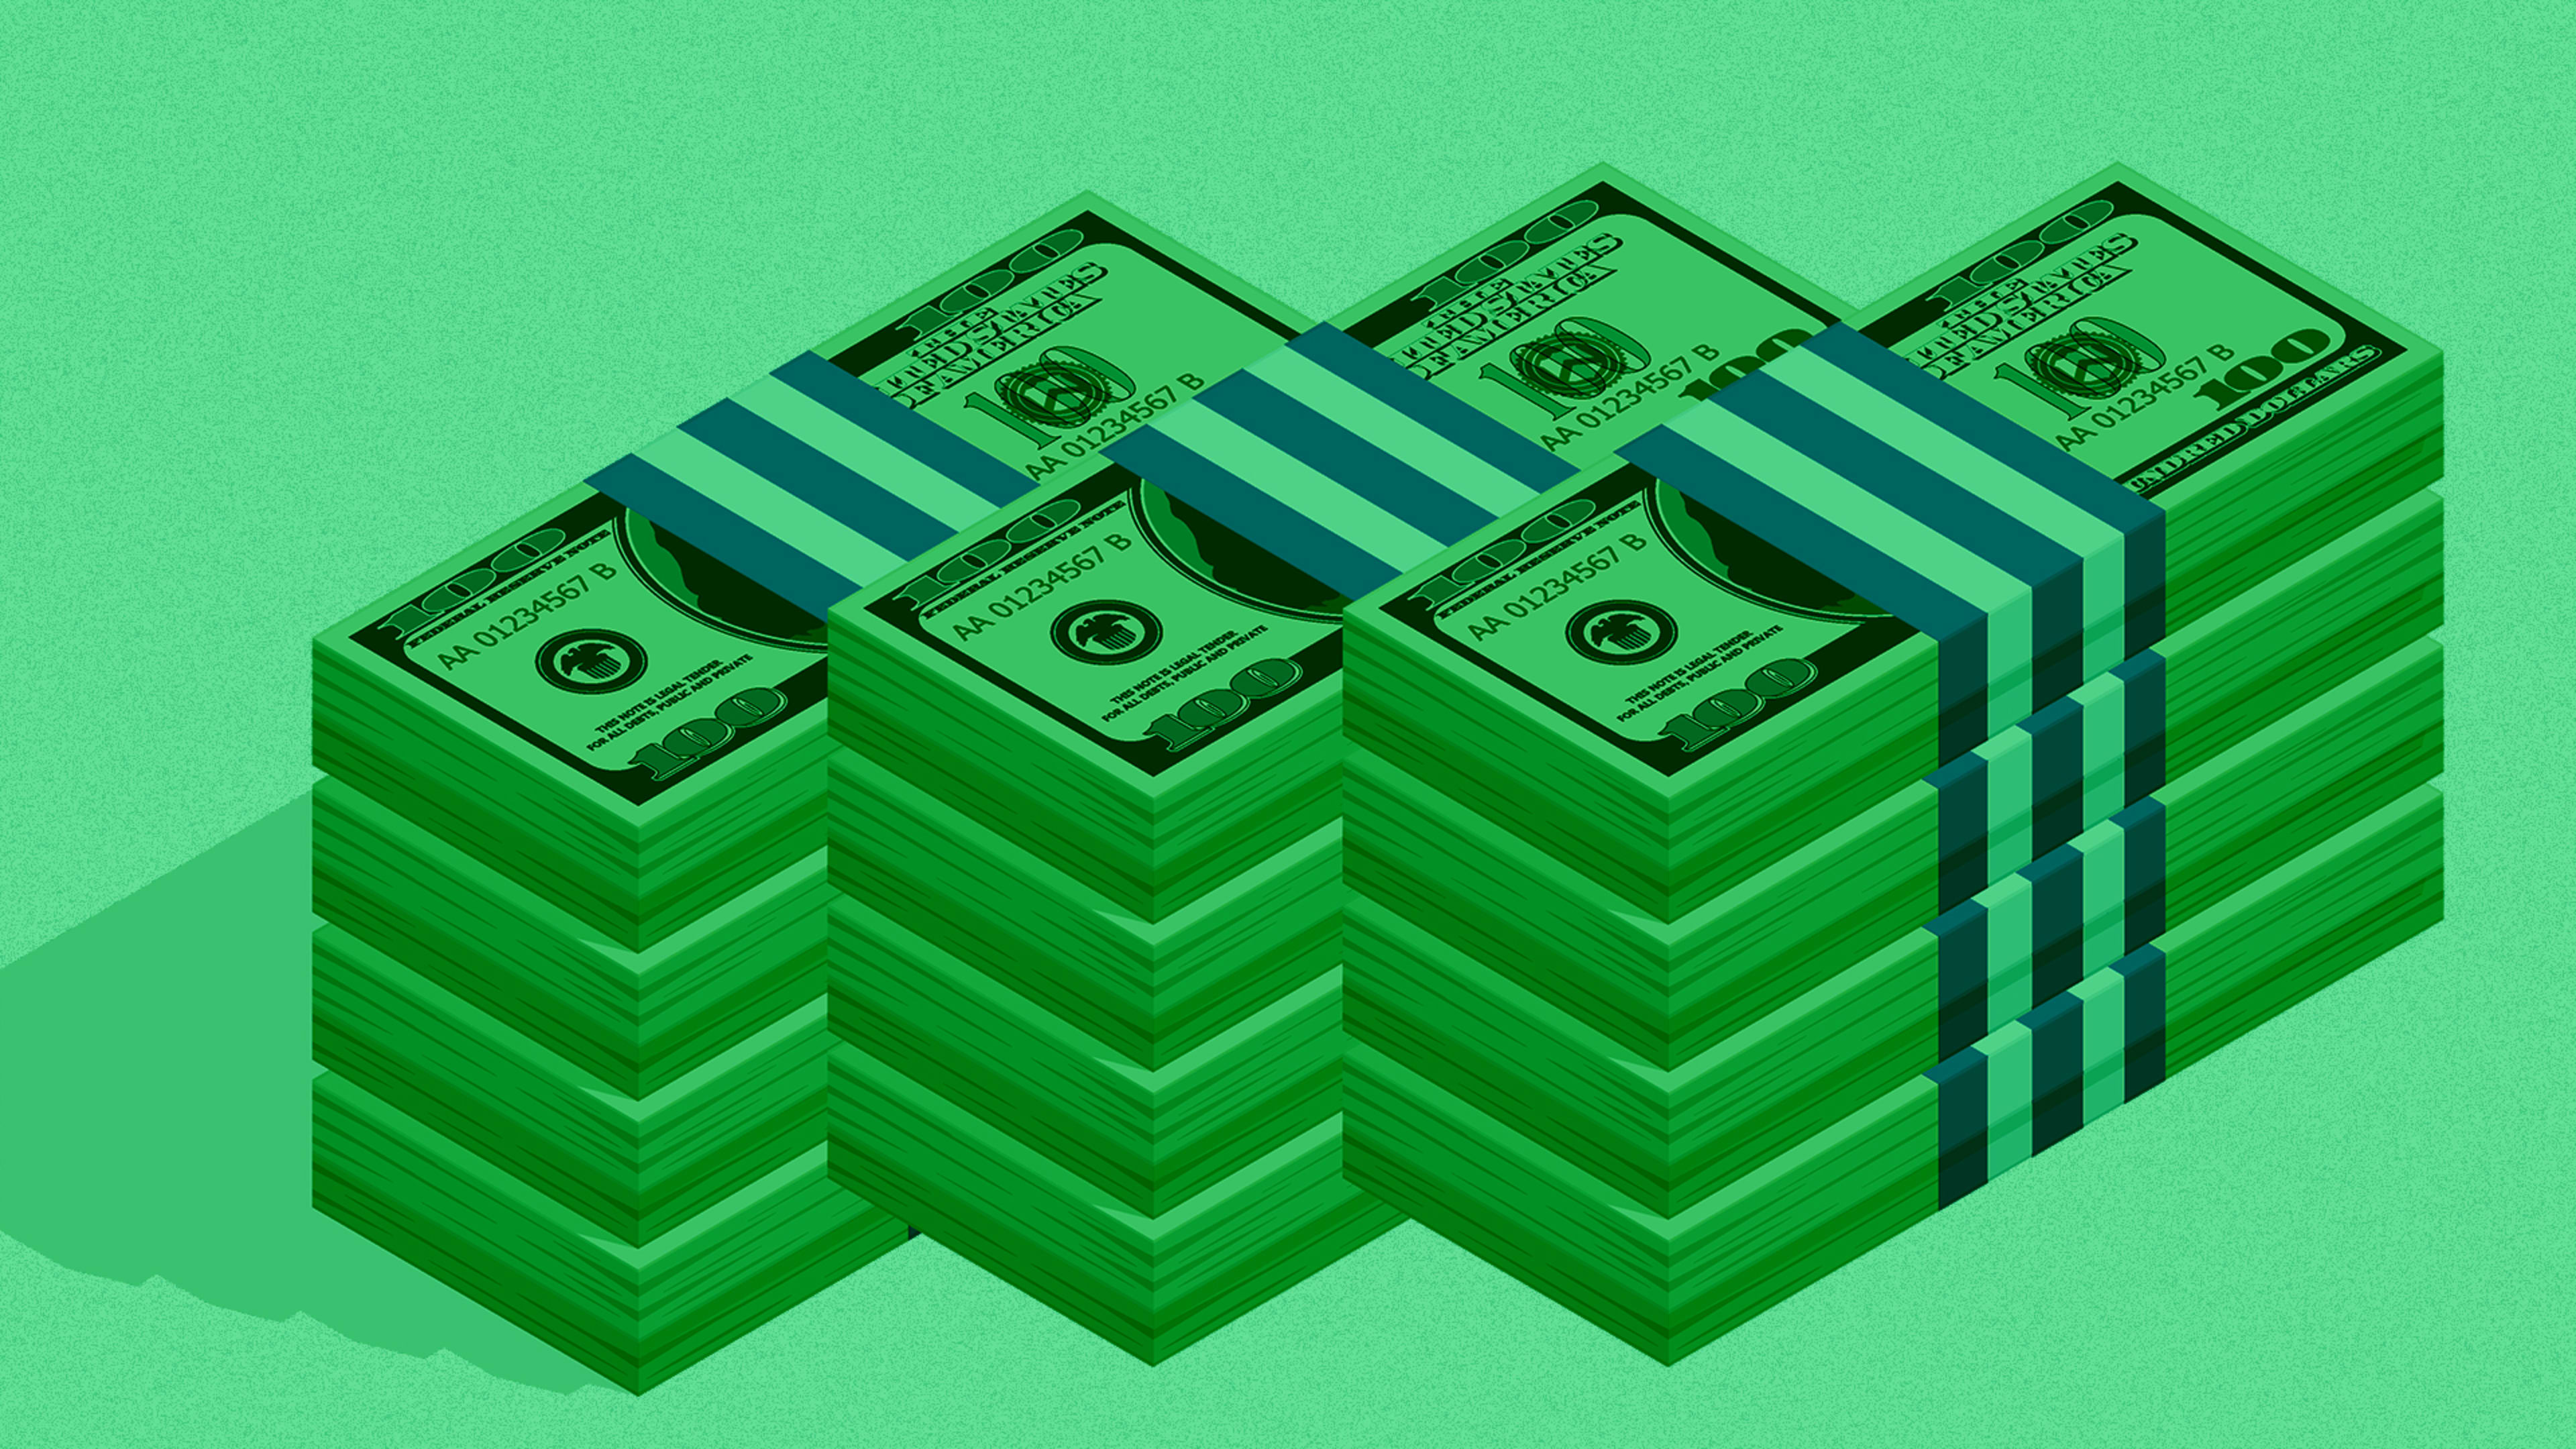 Employee salaries at a fast-growing startup: What are the going rates?